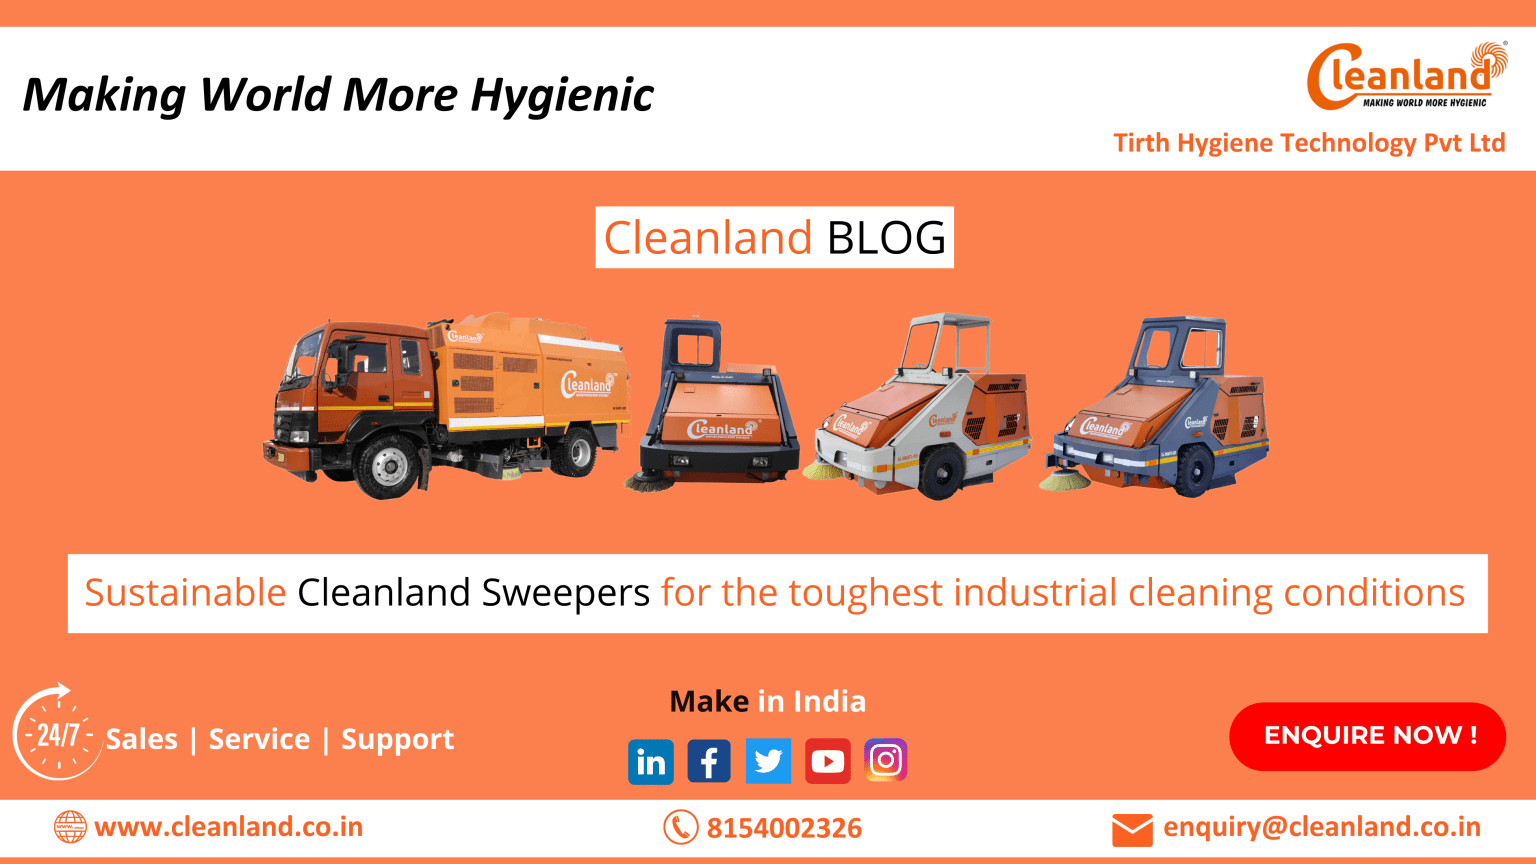 Sustainable Cleanland Sweepers for the toughest industrial cleaning conditions